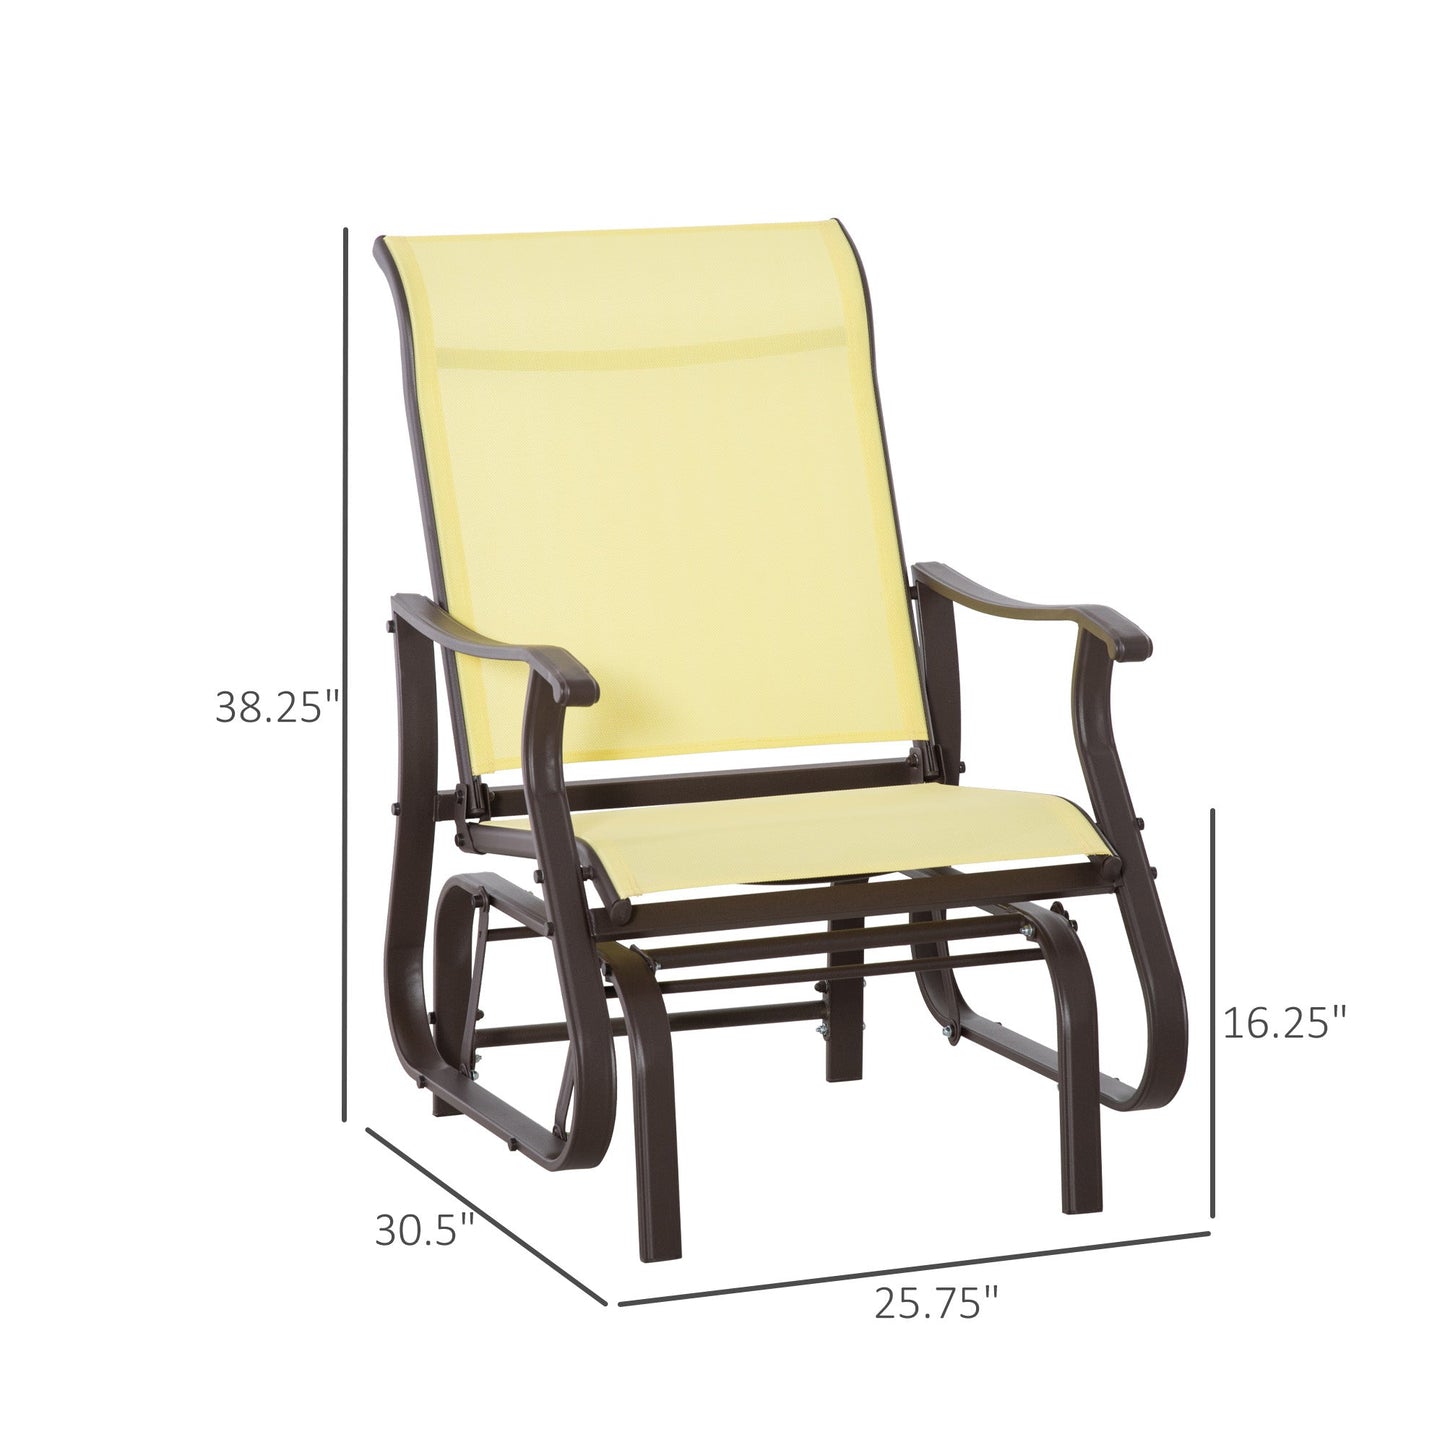 Outdoor and Garden-Outdoor Swing Glider Chair, Patio Mesh Rocking Chair with Steel Frame for Backyard, Garden and Porch, Beige - Outdoor Style Company